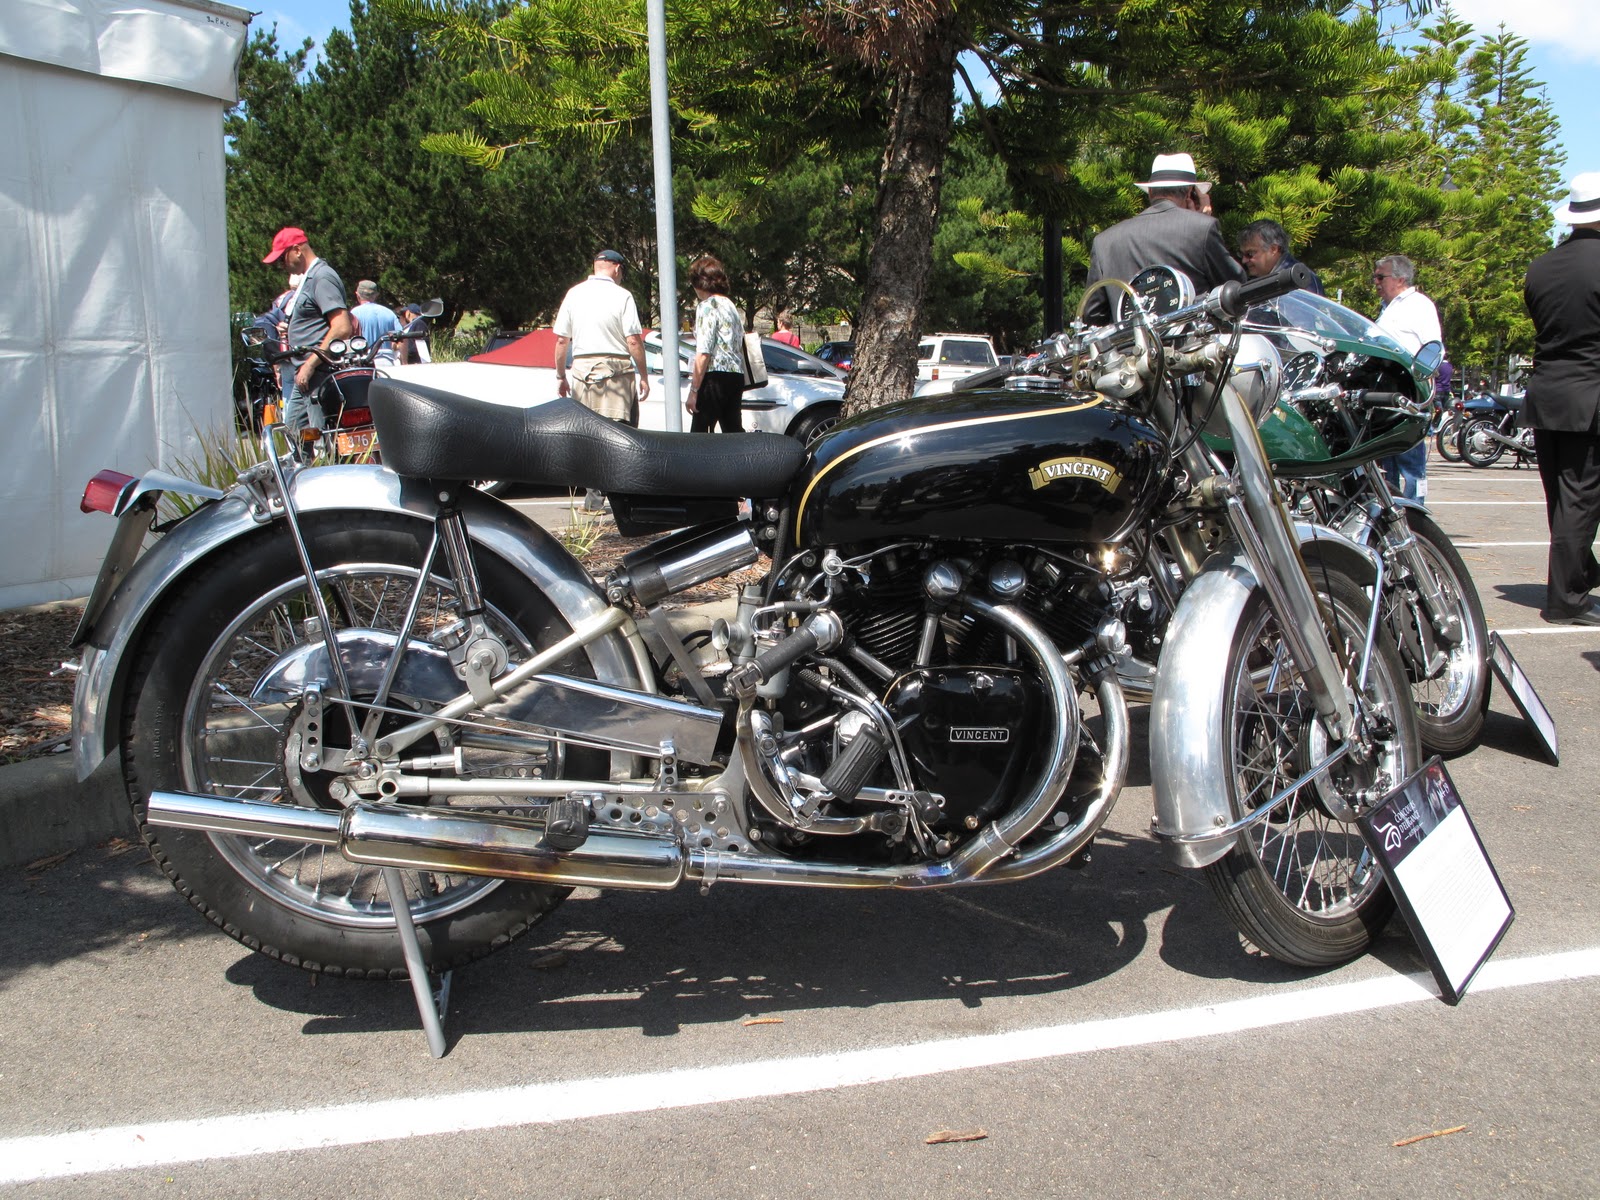 all black motorcycle for sale legendary Vincent Black Shadow. Just love those black casings.